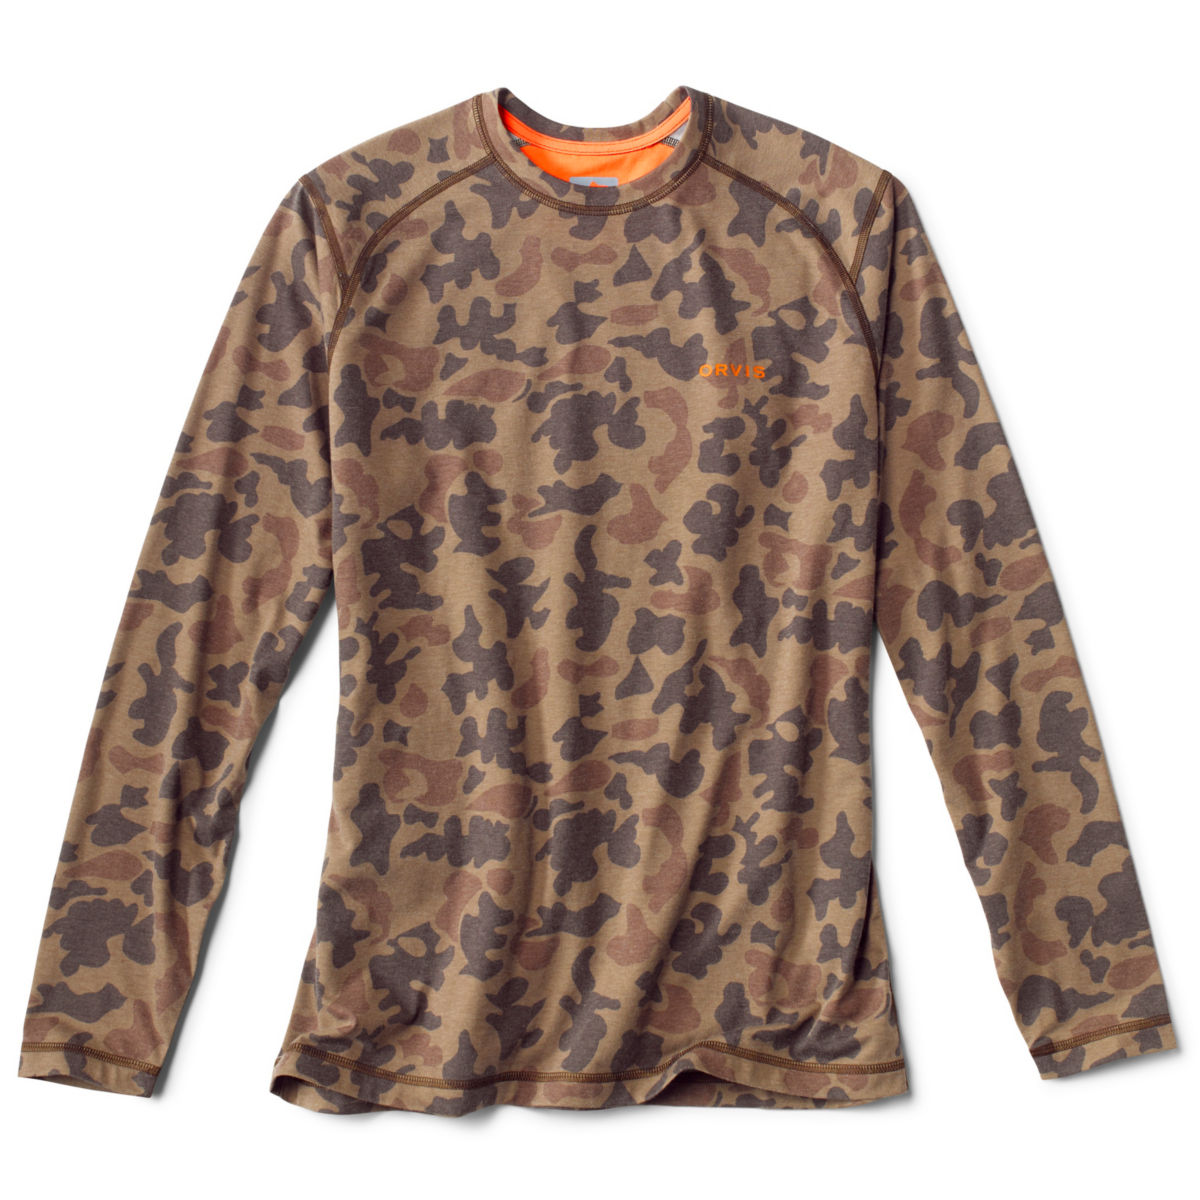 drirelease®  Long-Sleeved Crew - image number 0